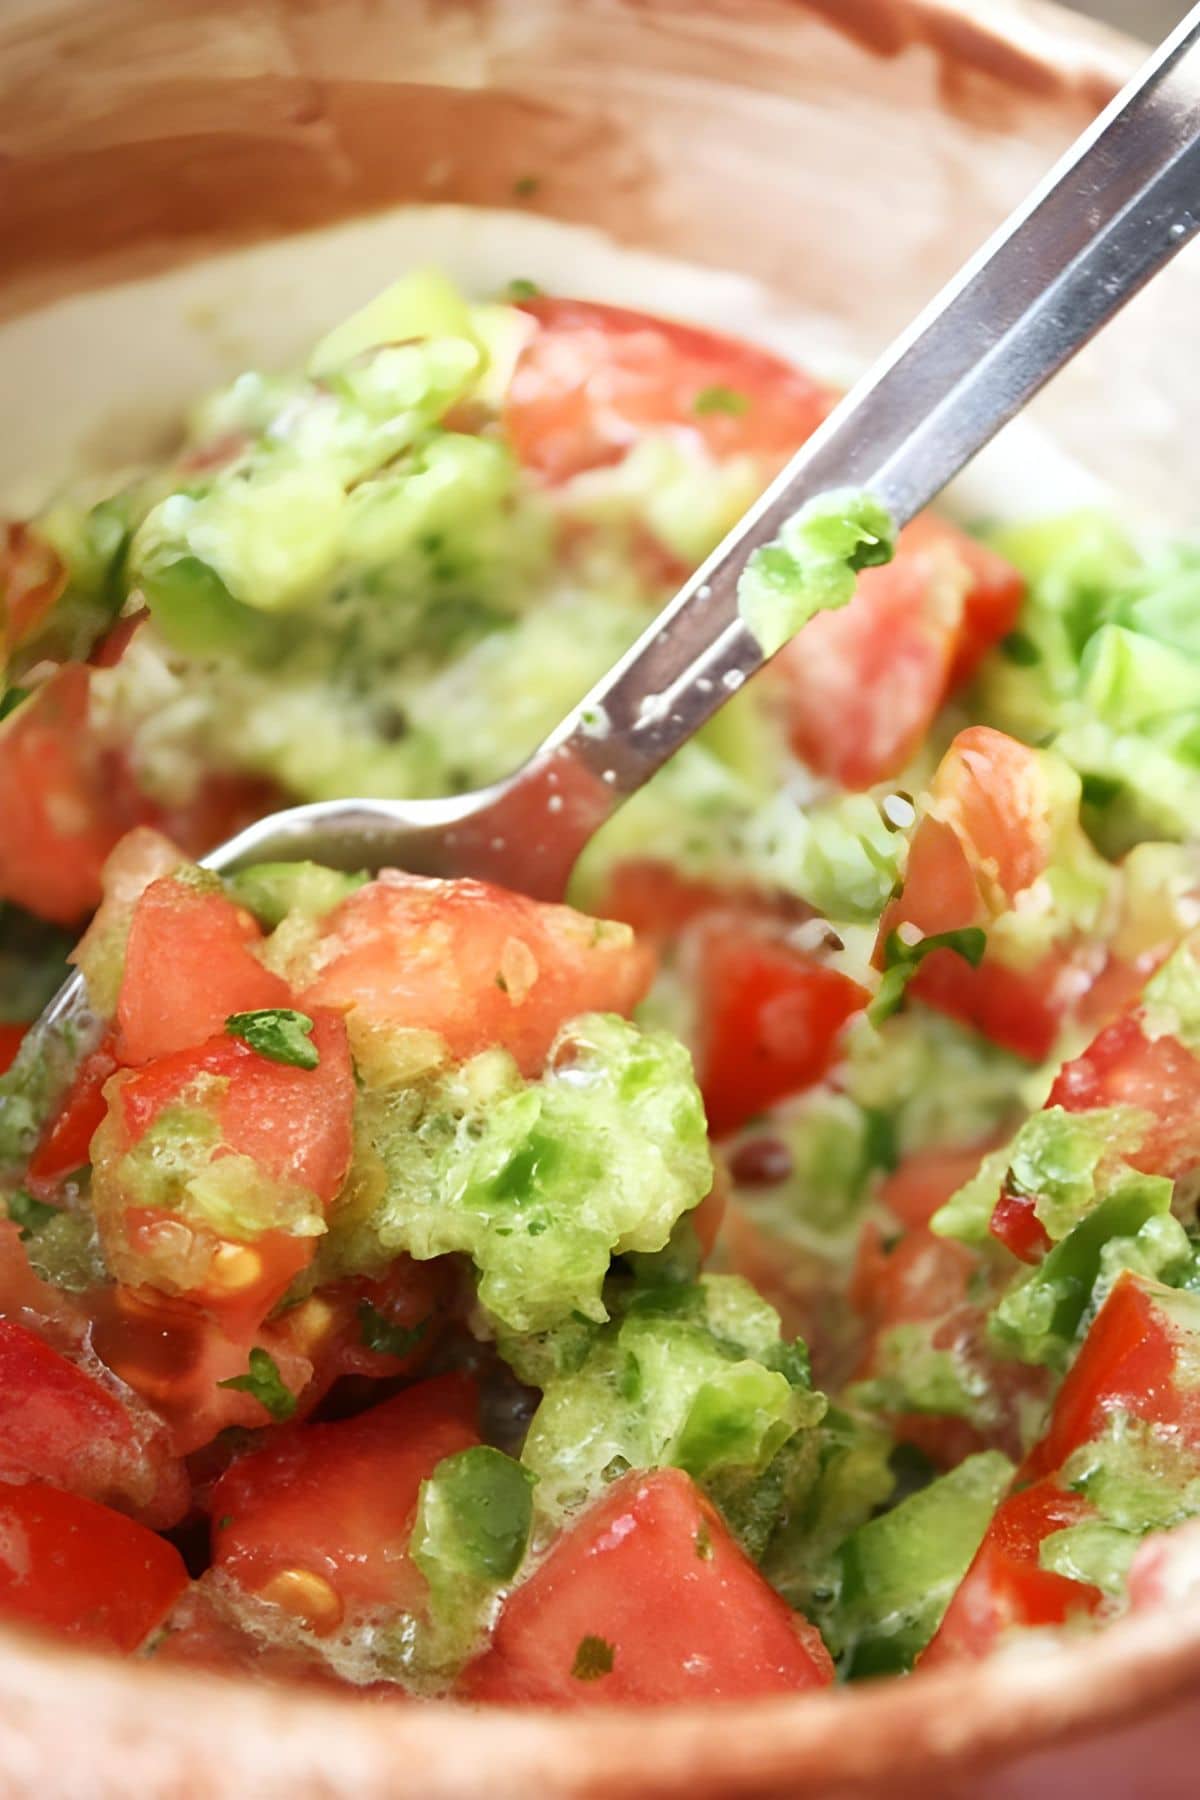 A spoon mixing up fresh salsa.